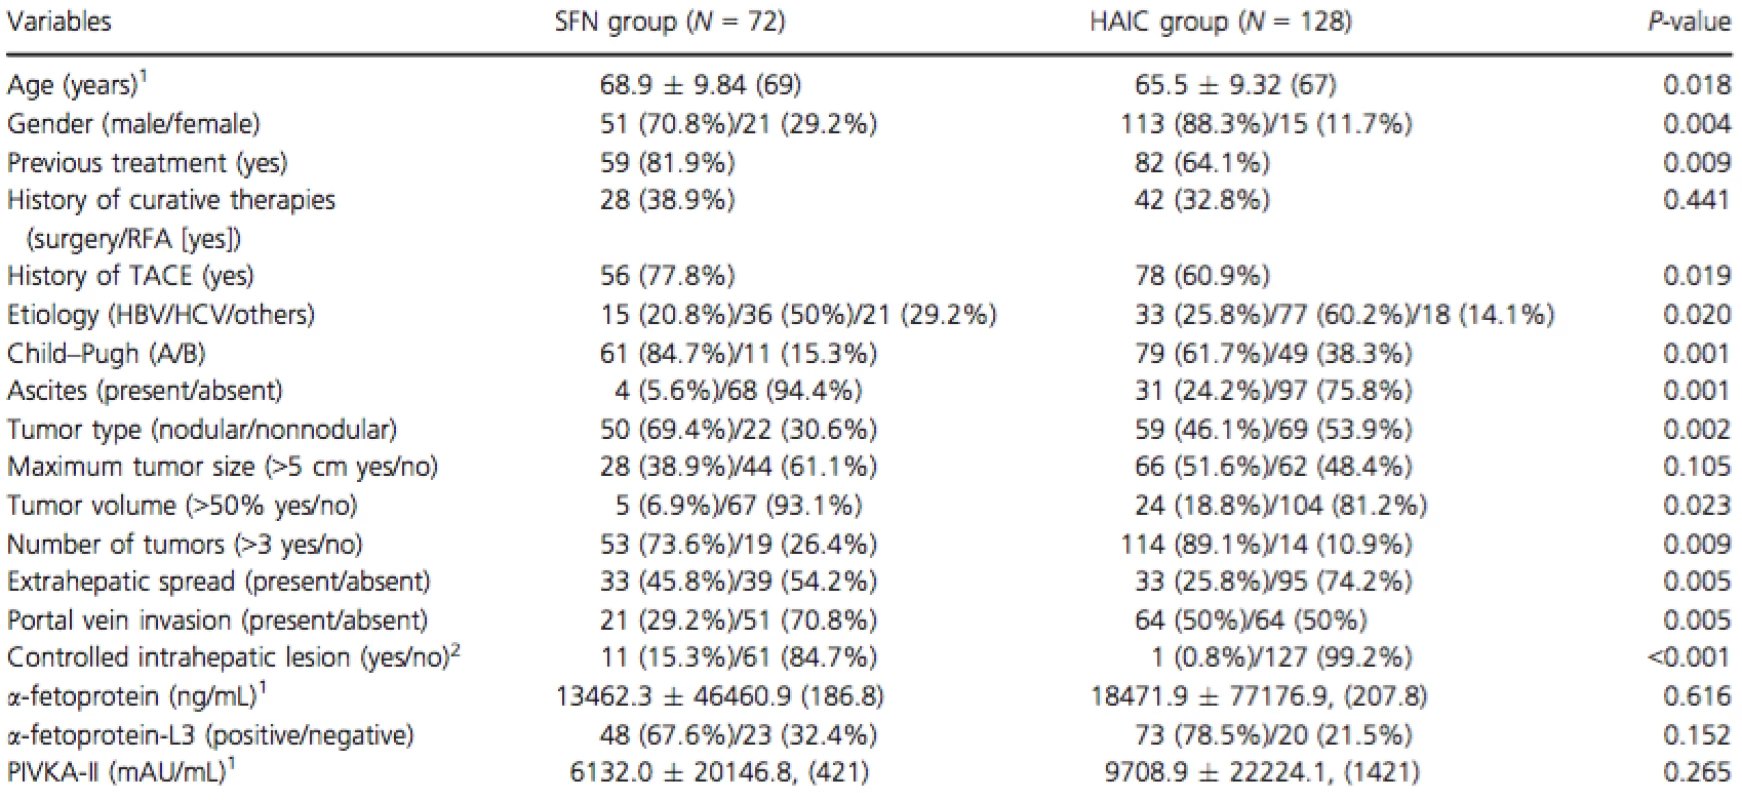 Baseline clinical and tumor characteristics for each group